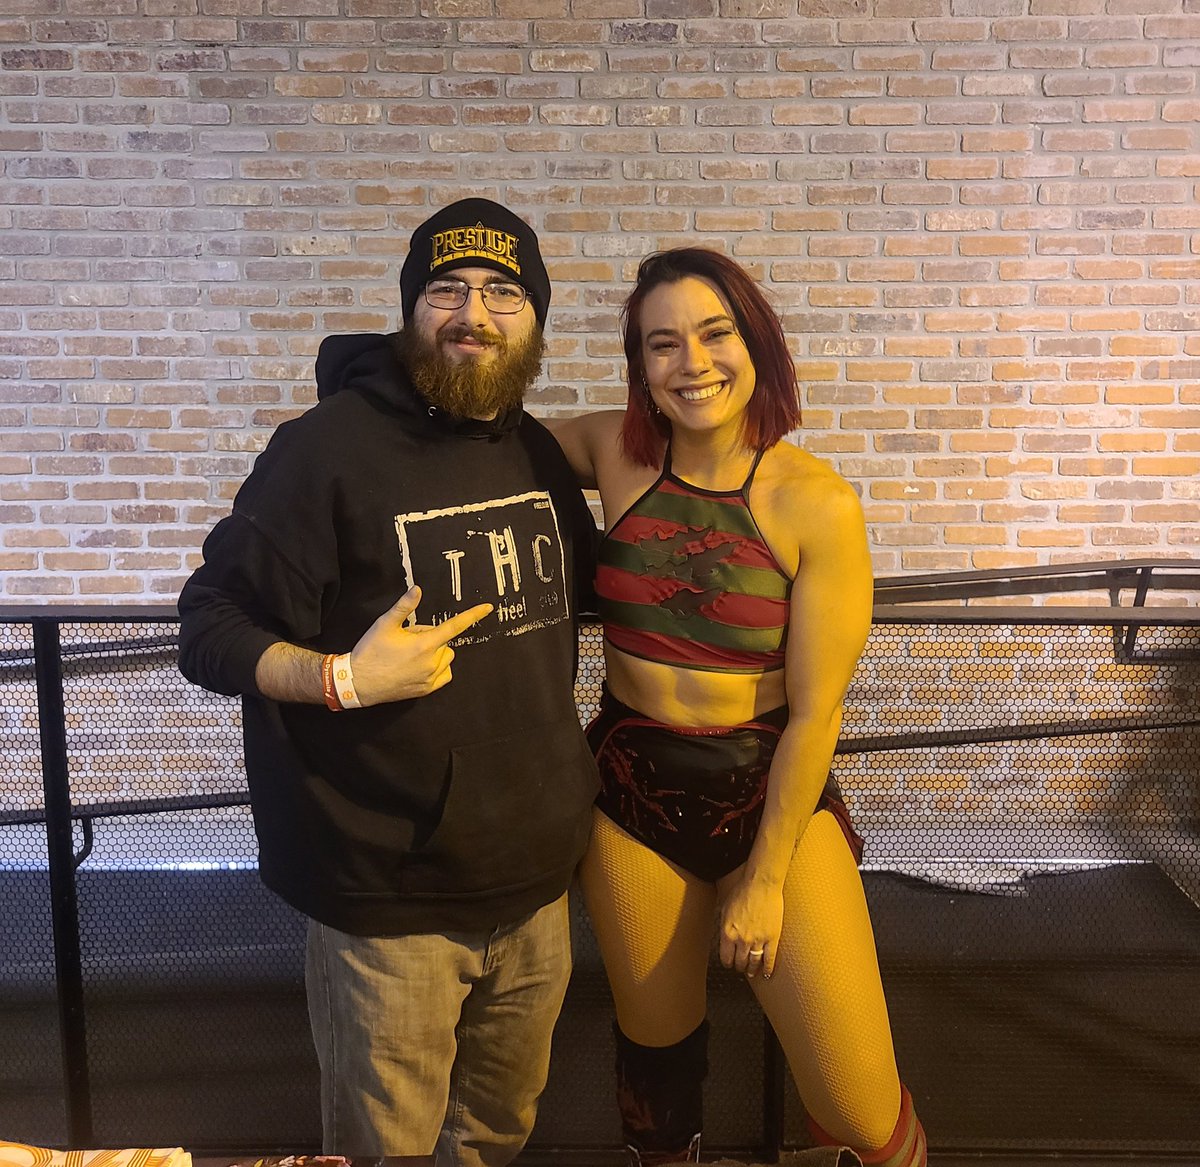 Last night was awesome to see @Kelly_WP perform live again. #BoundForGlory was the 1st time I got that chance when she was in the CallYourShotGauntlet, but to watch her have the match she did with @mashaslamovich was something special. Thank you for being so great
#HybridMoments